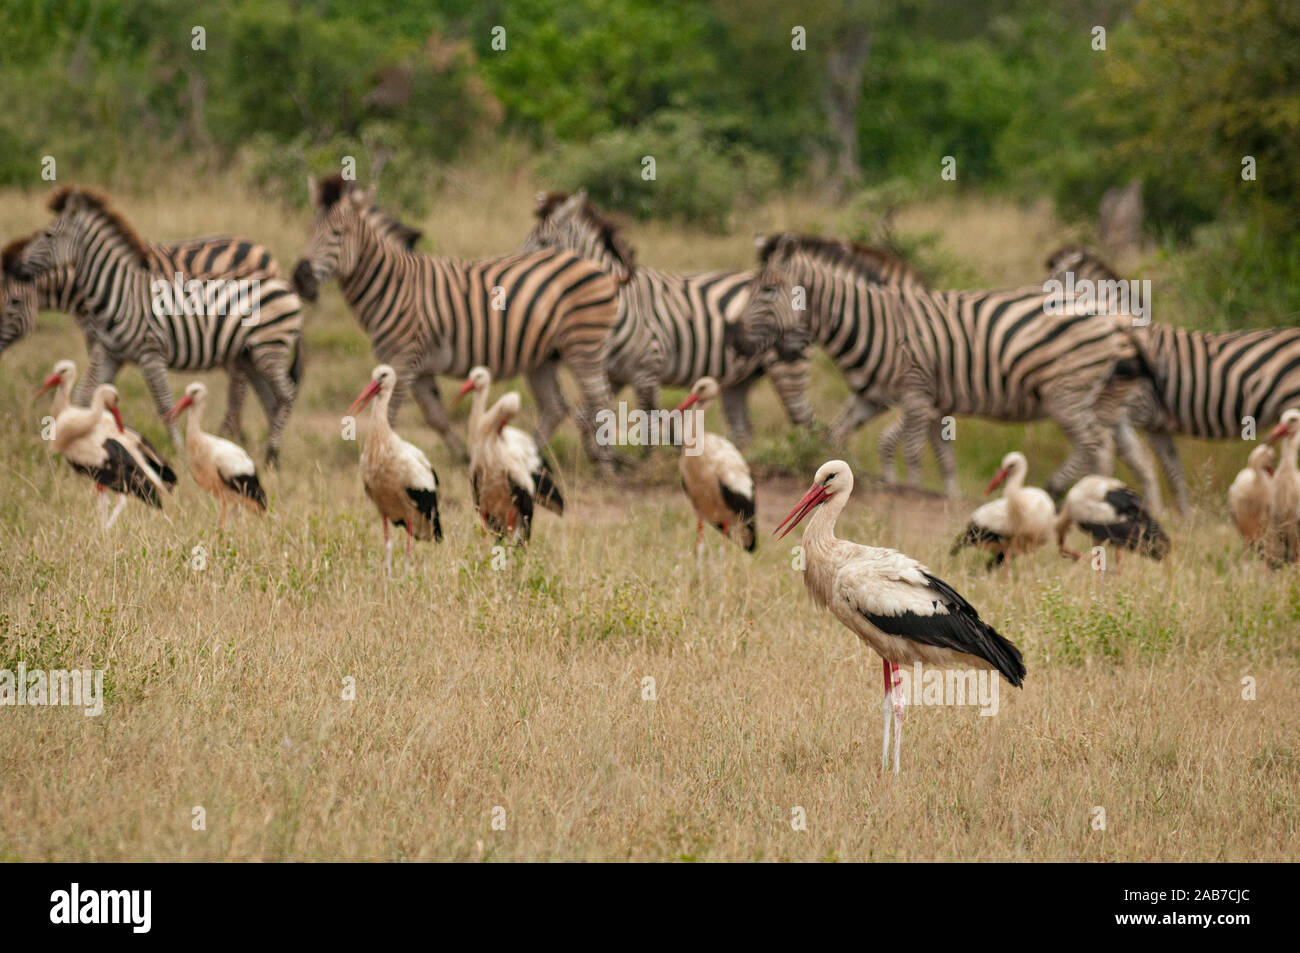 White Storks and Burchells (or Plains) Zebras in the Kruger National Park, Mpumalanga Province, South Africa. Stock Photo